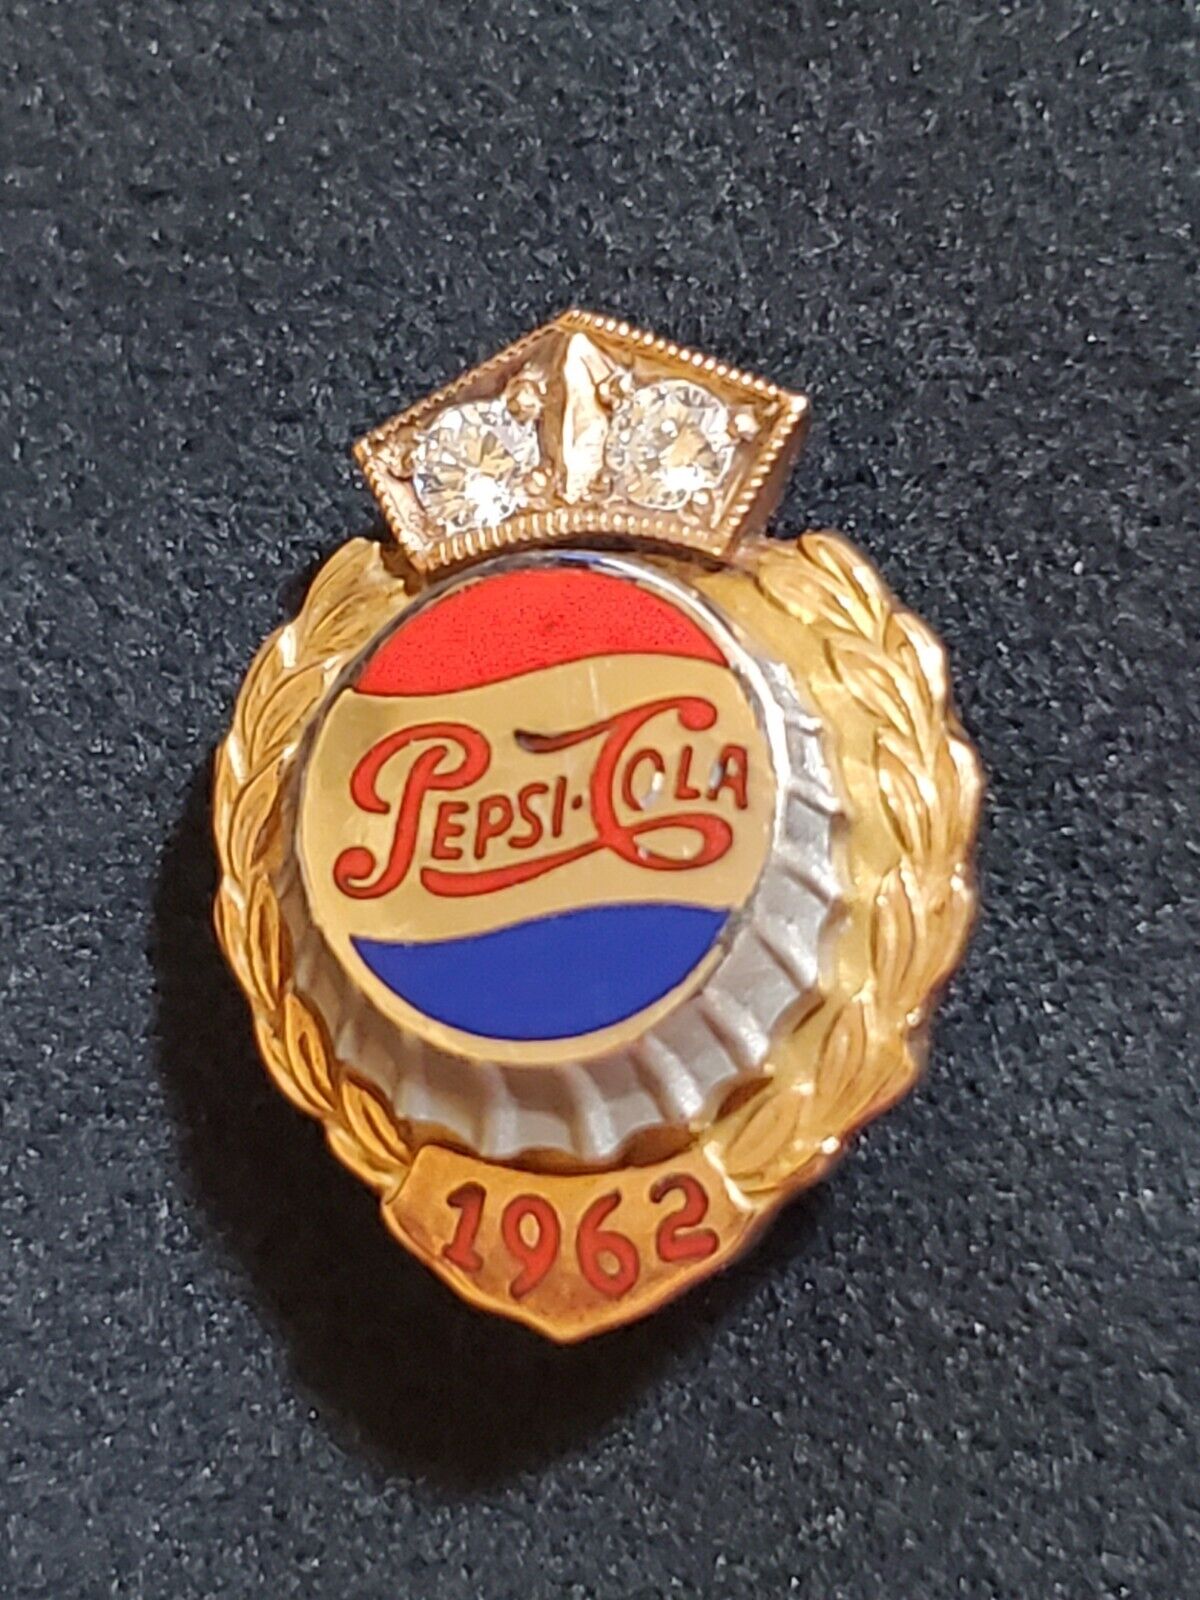 1962 PEPSI 10K Gold Two Diamonds Collectible Lapel Pin - Extremely RARE